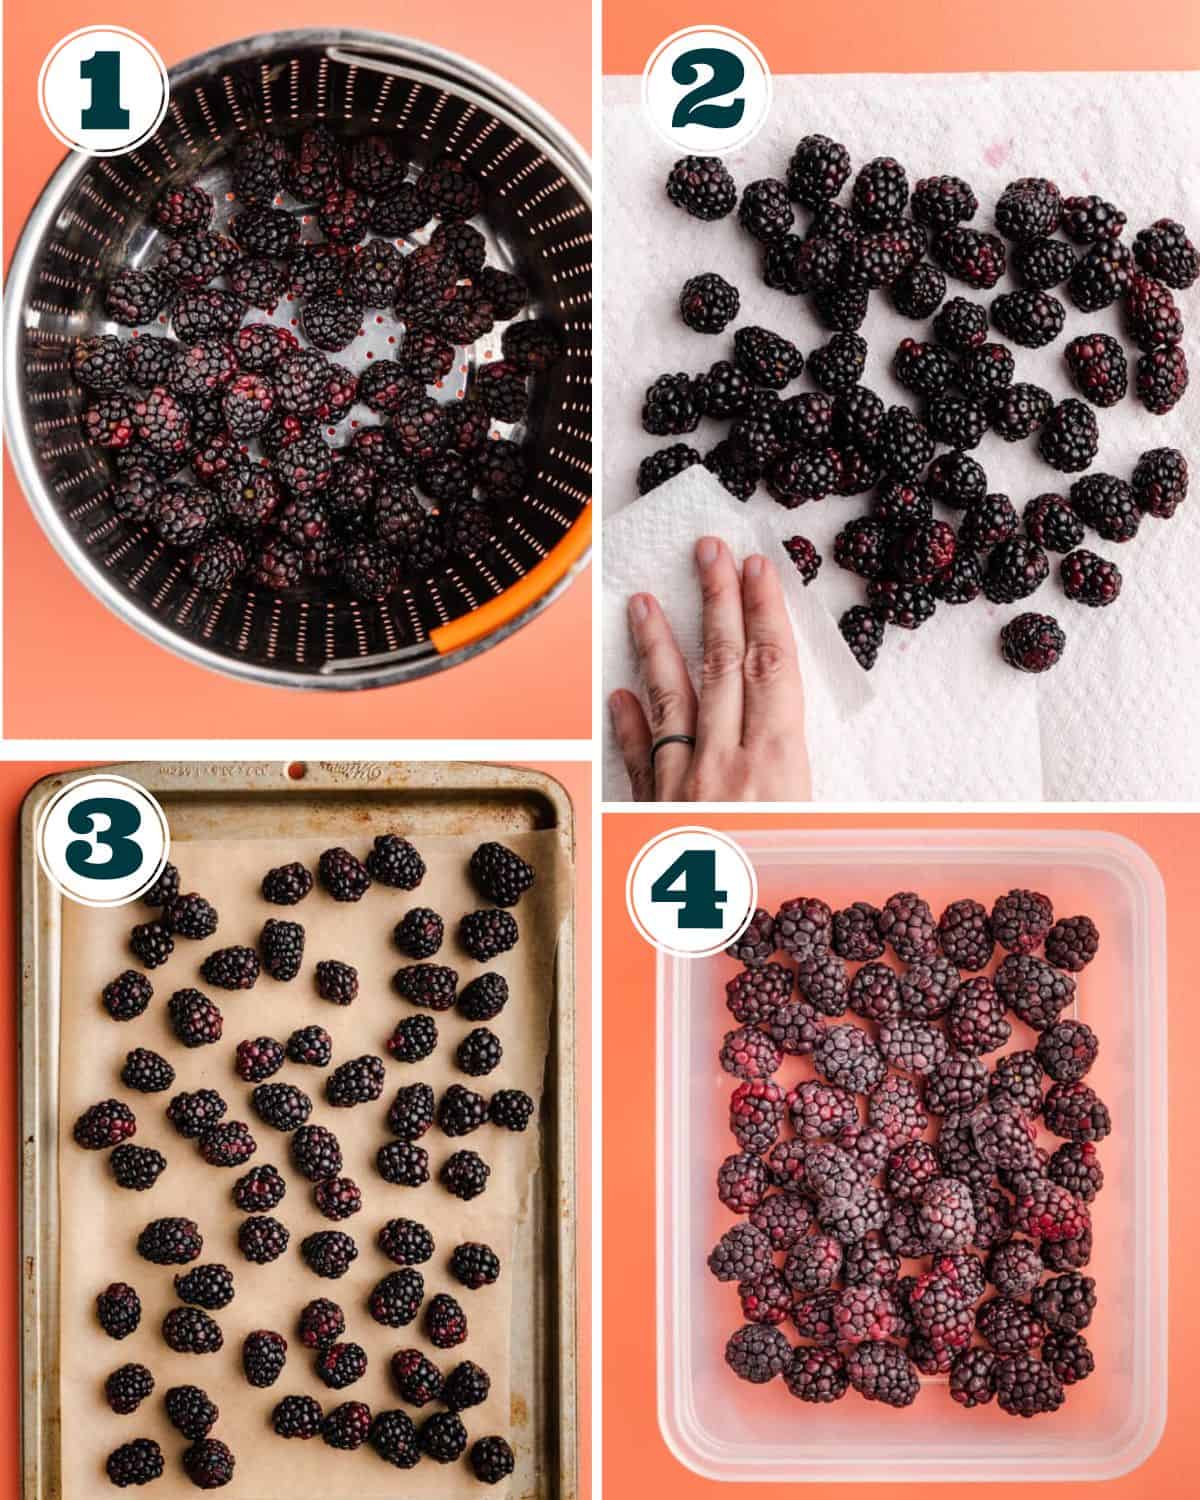 Step by step how to freeze blackberries.